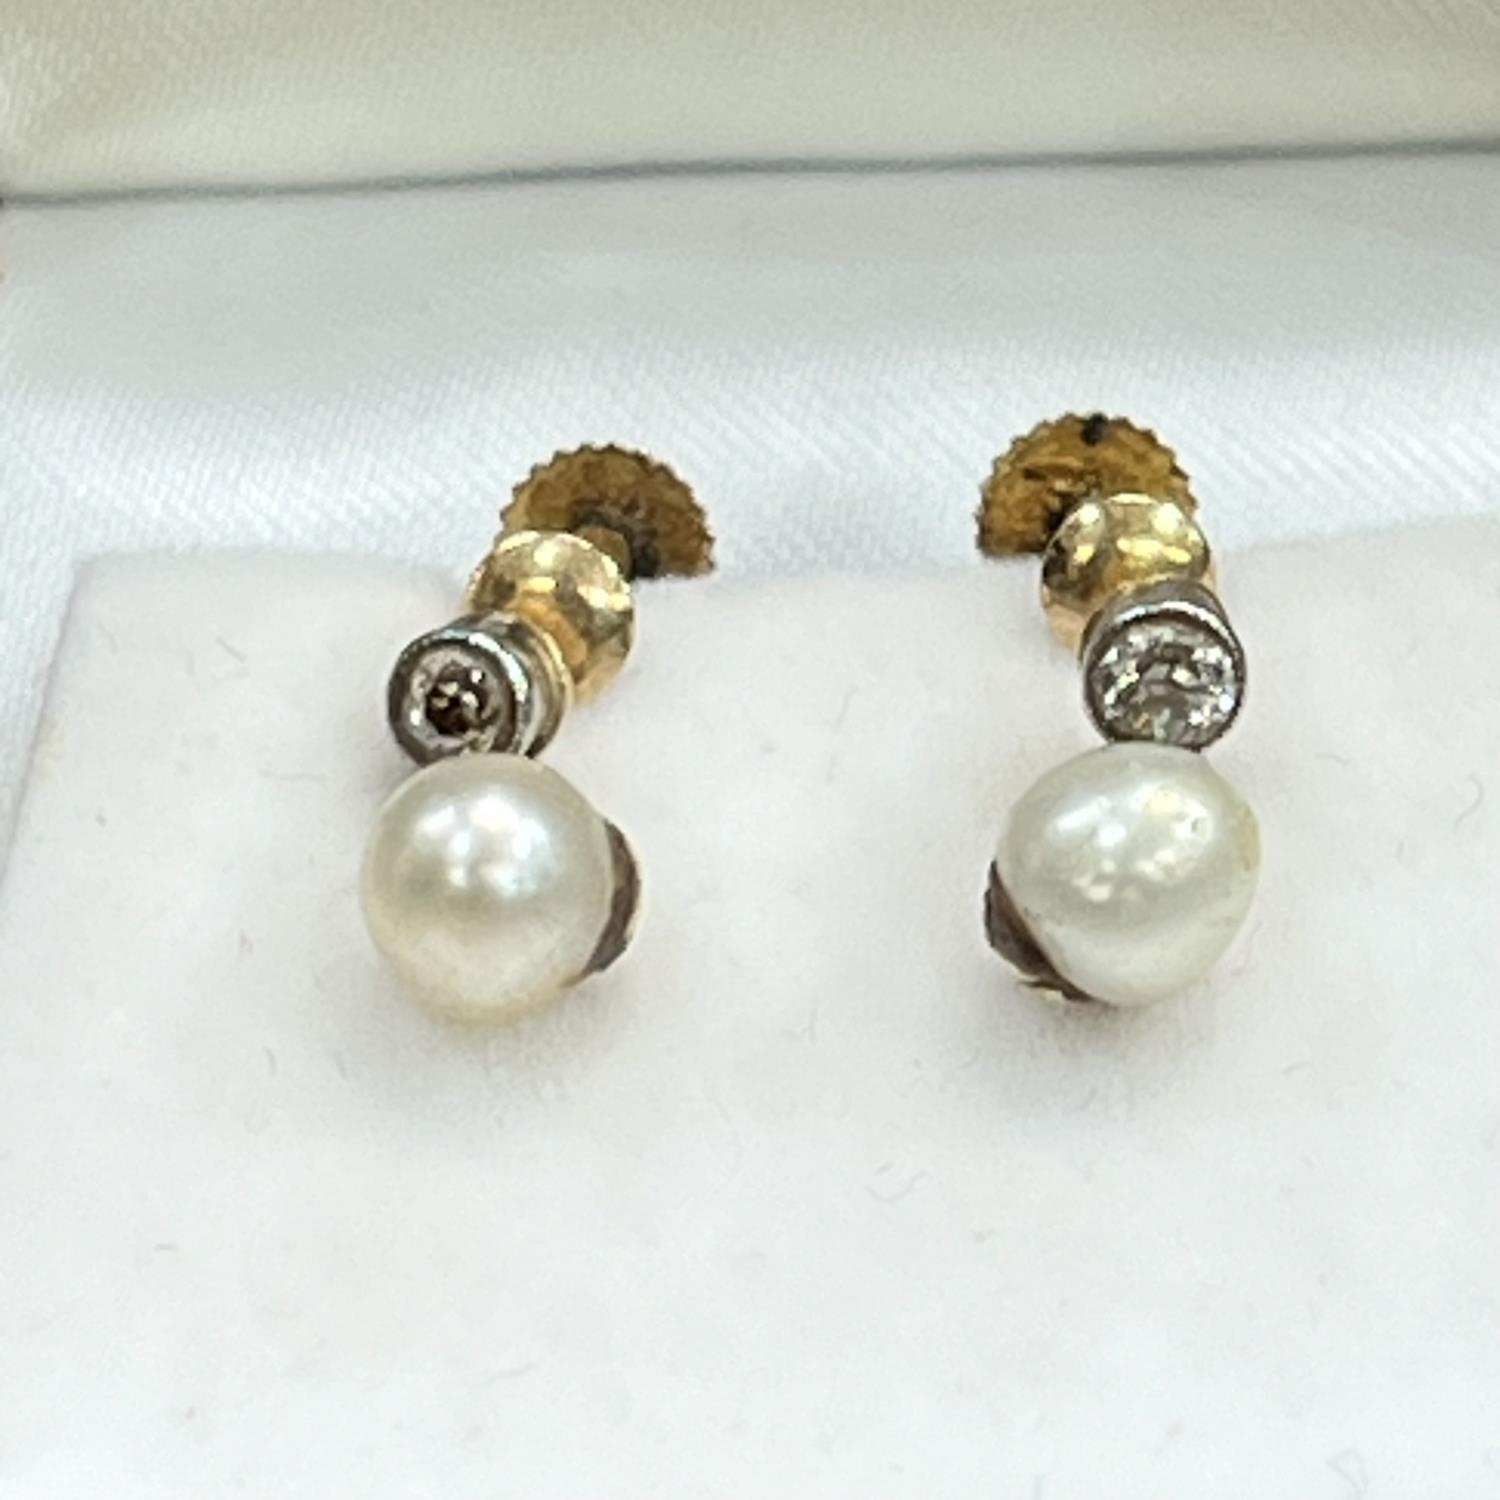 A pair of cultured pearl and diamond earrings, c1920, in 9ct gold, each 5.5mm pearl pendant from a